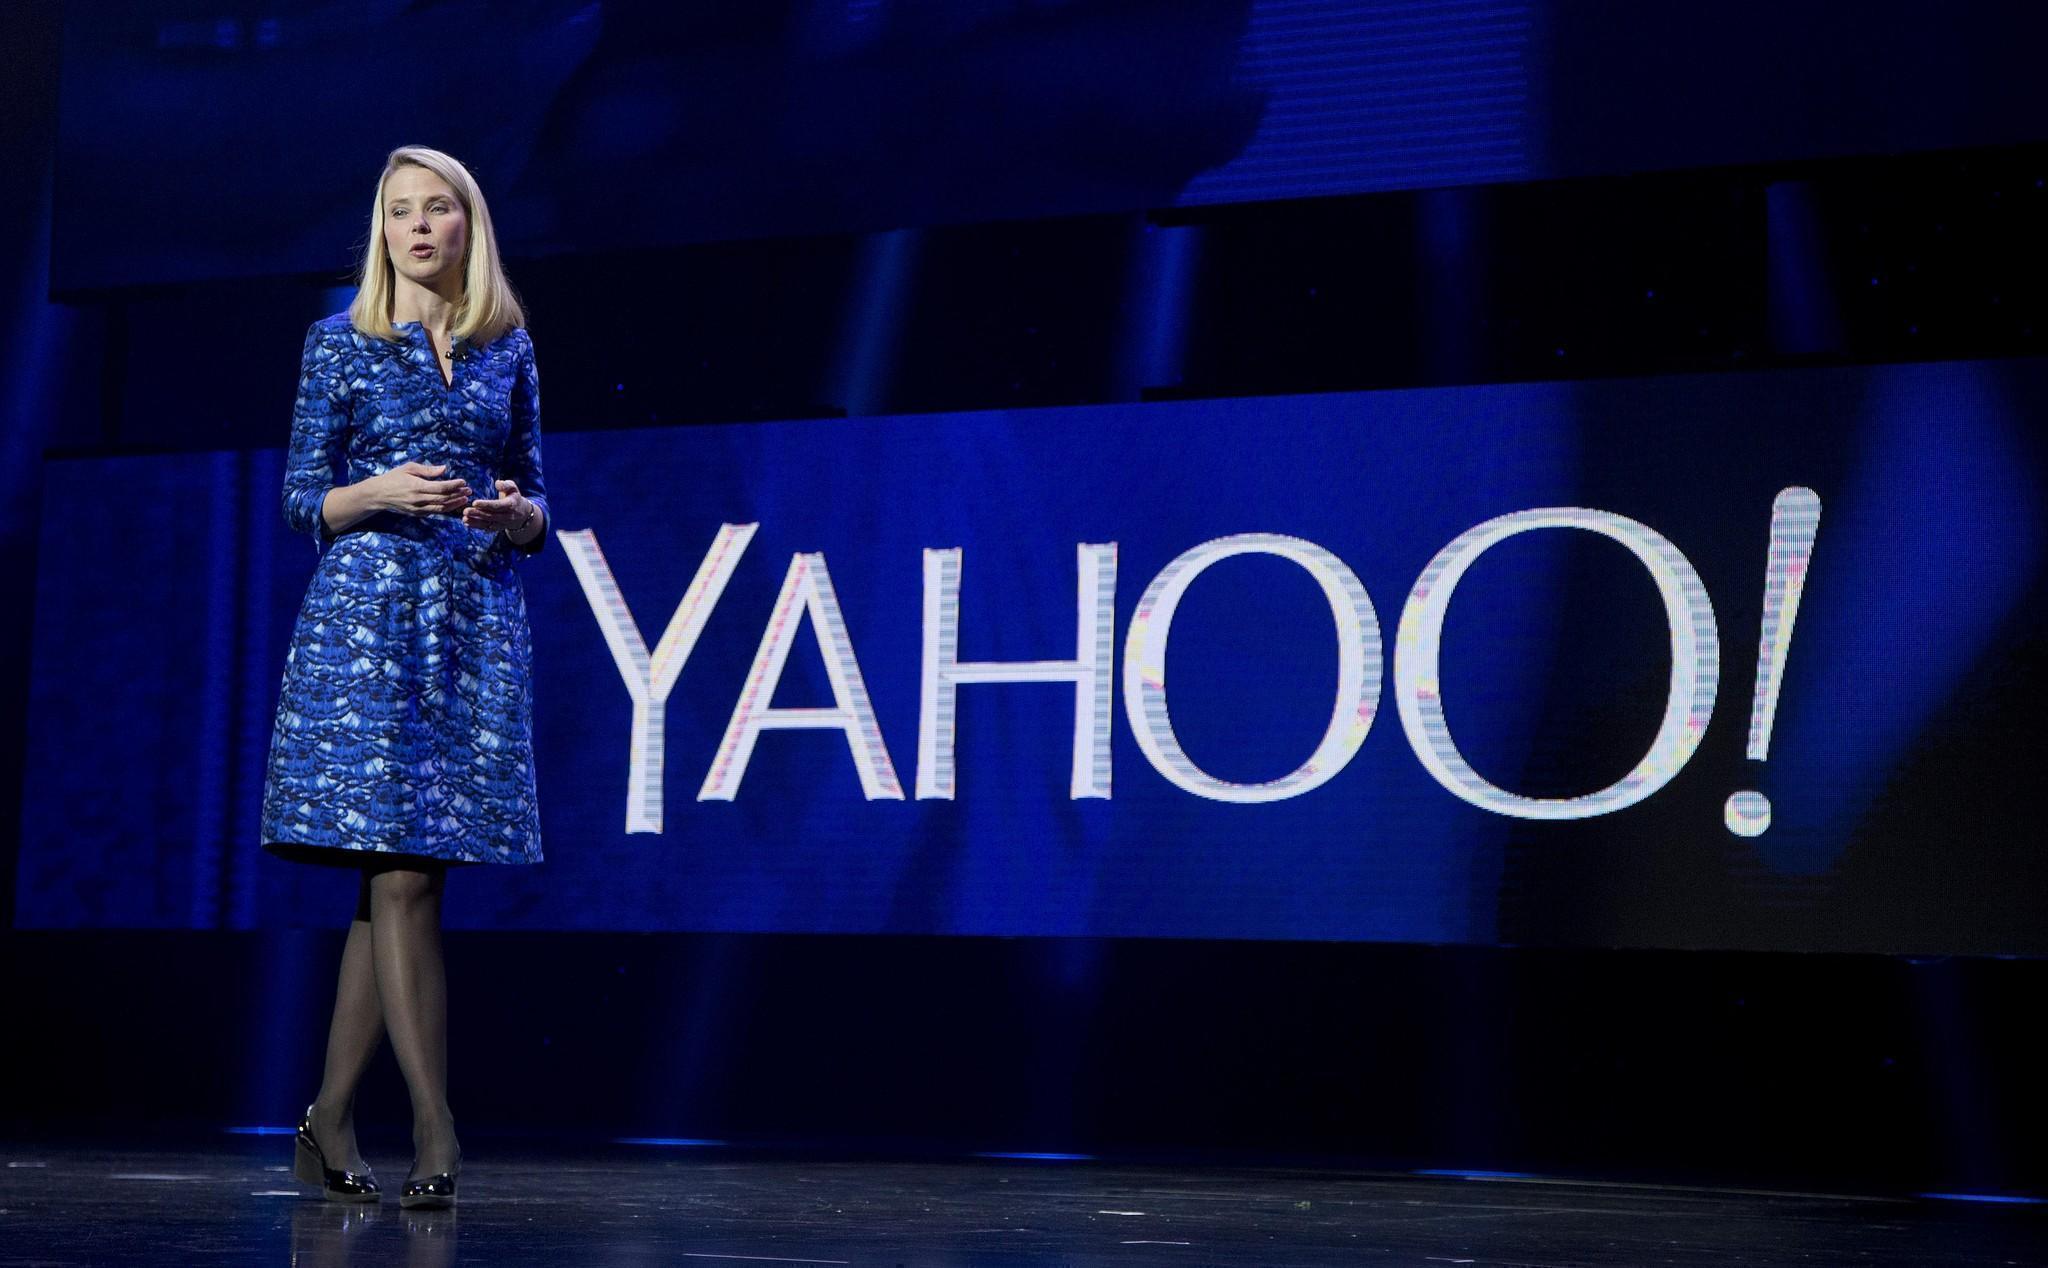 Security breach may provide Verizon with a way out of $4.8 billion Yahoo acquisition